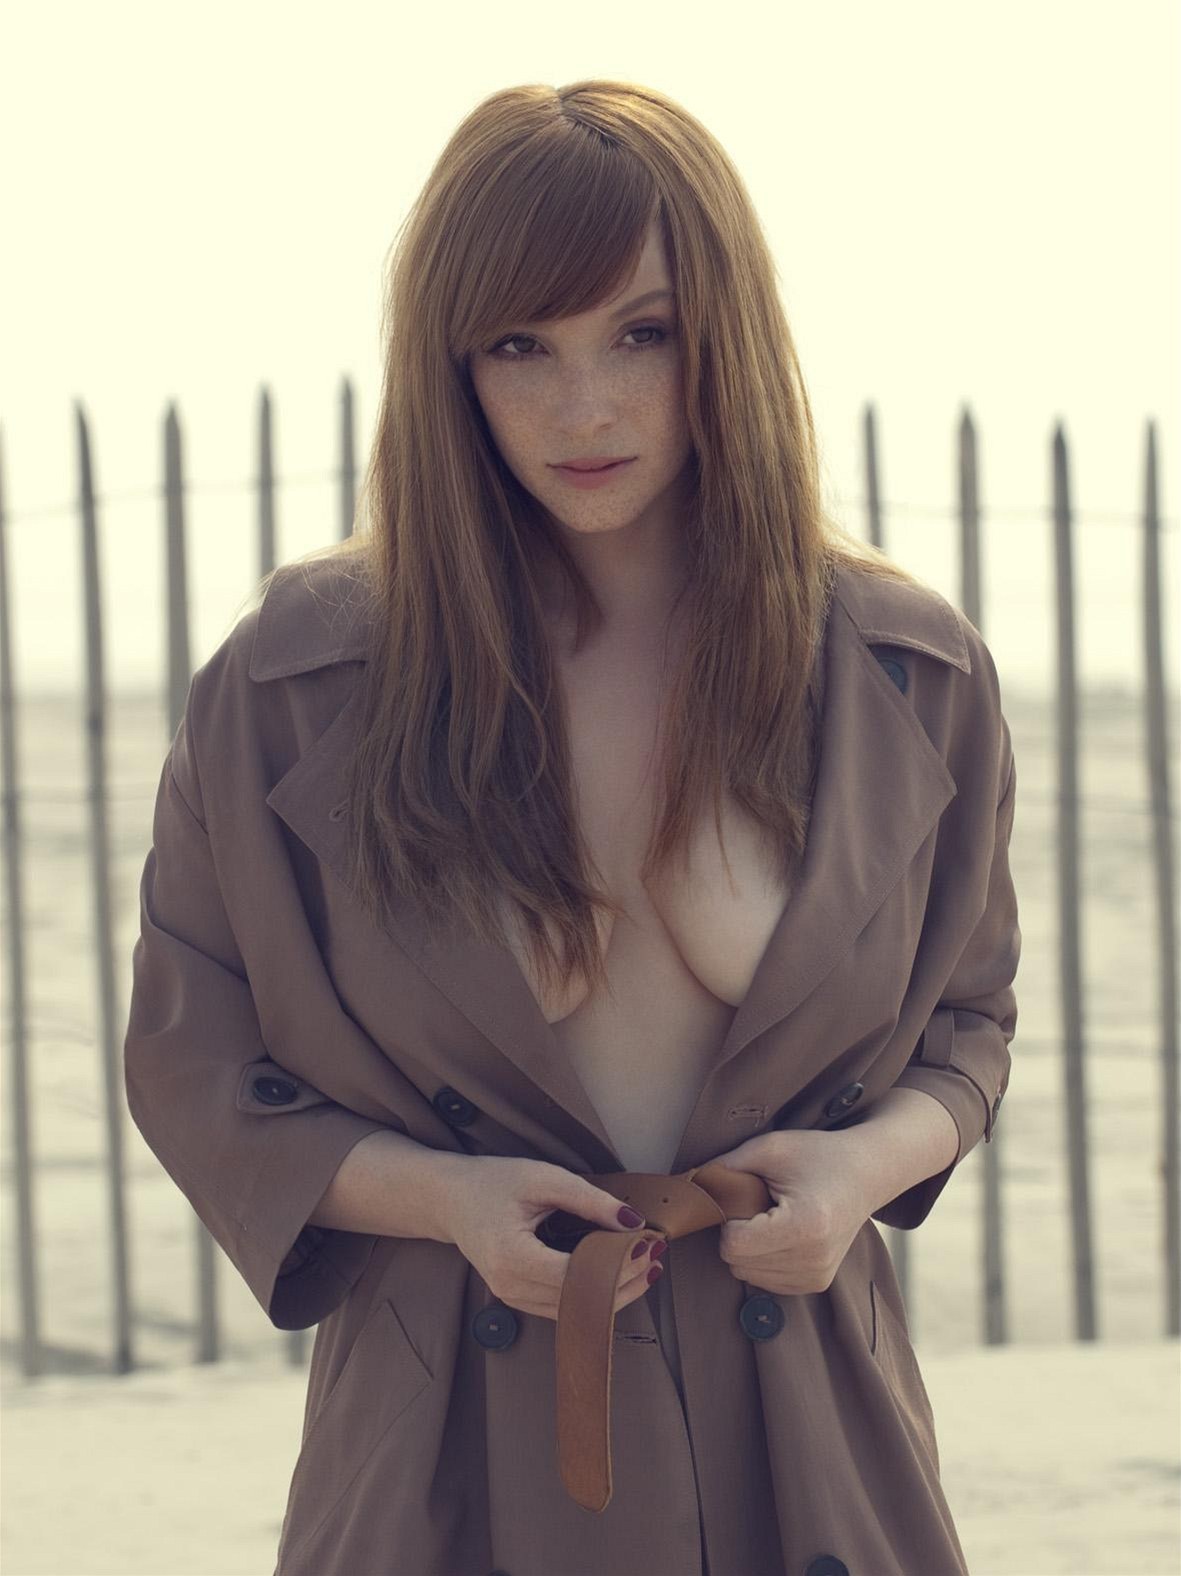 Vica Kerekes (not to be confused with Christina Hendricks)